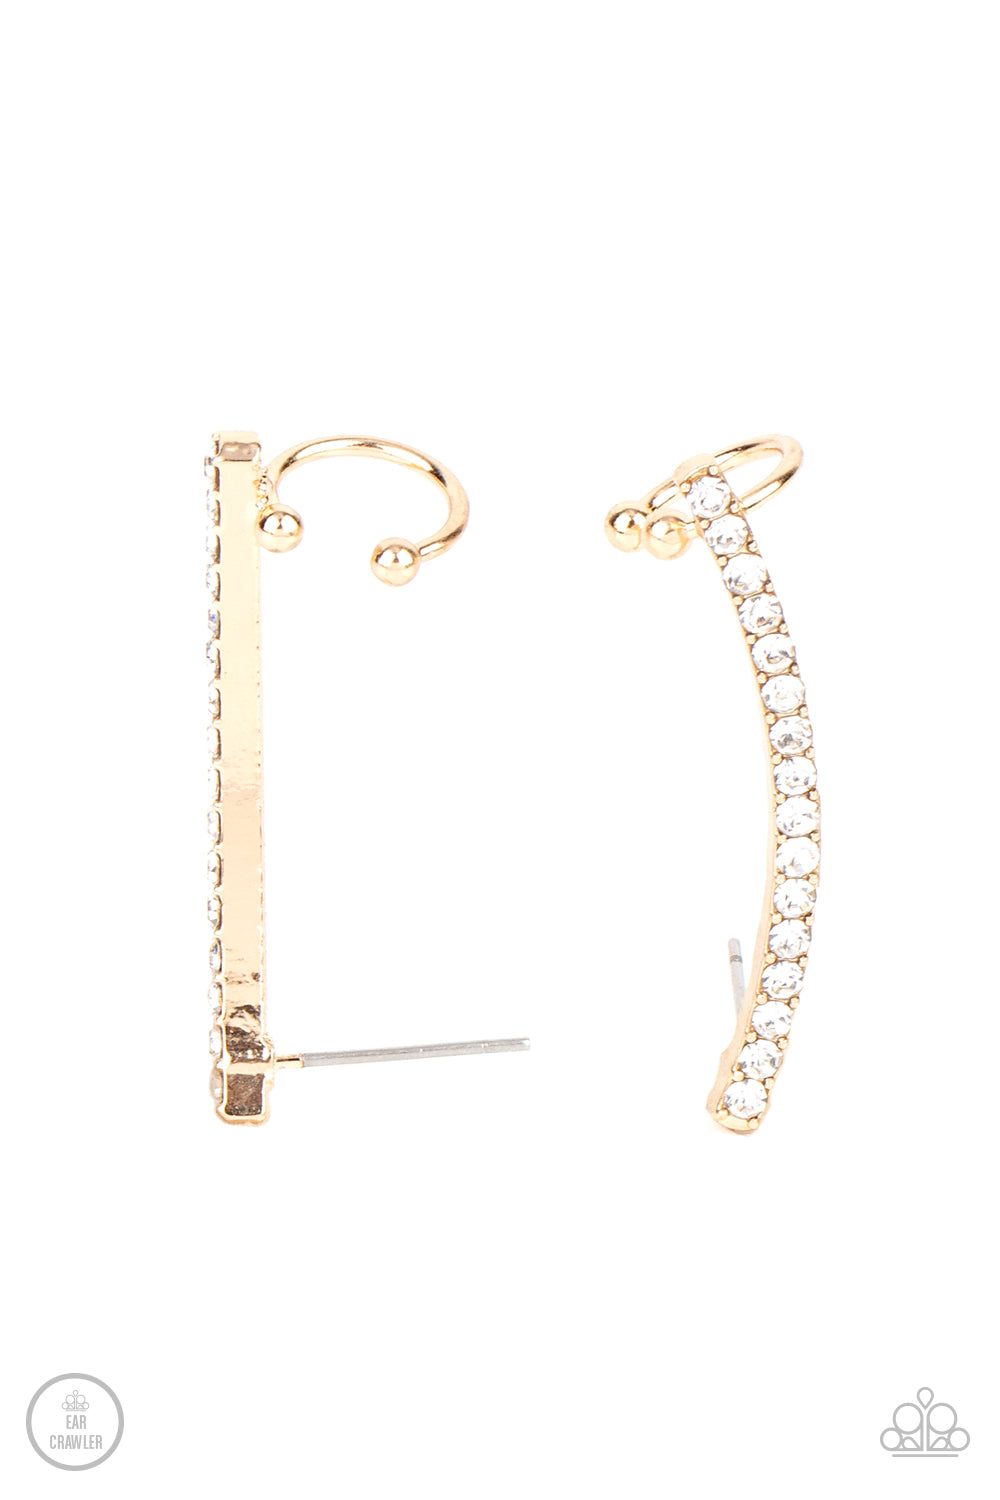 Give Me The SWOOP Gold Paparazzi Earrings Cashmere Pink Jewels